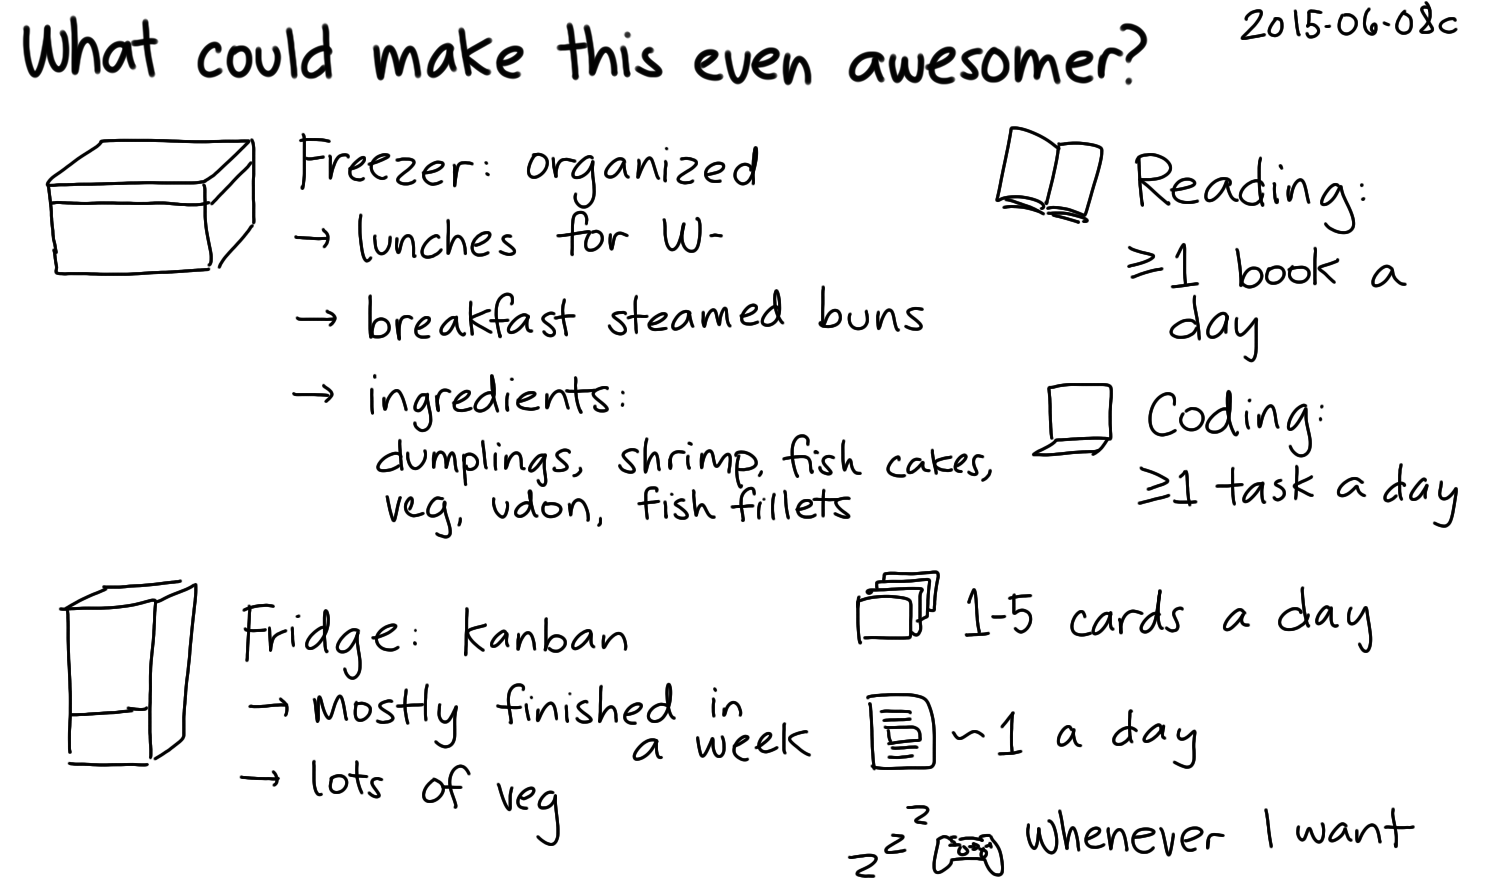 2015-06-08c What could make this even awesomer -- index card #life #kaizen.png